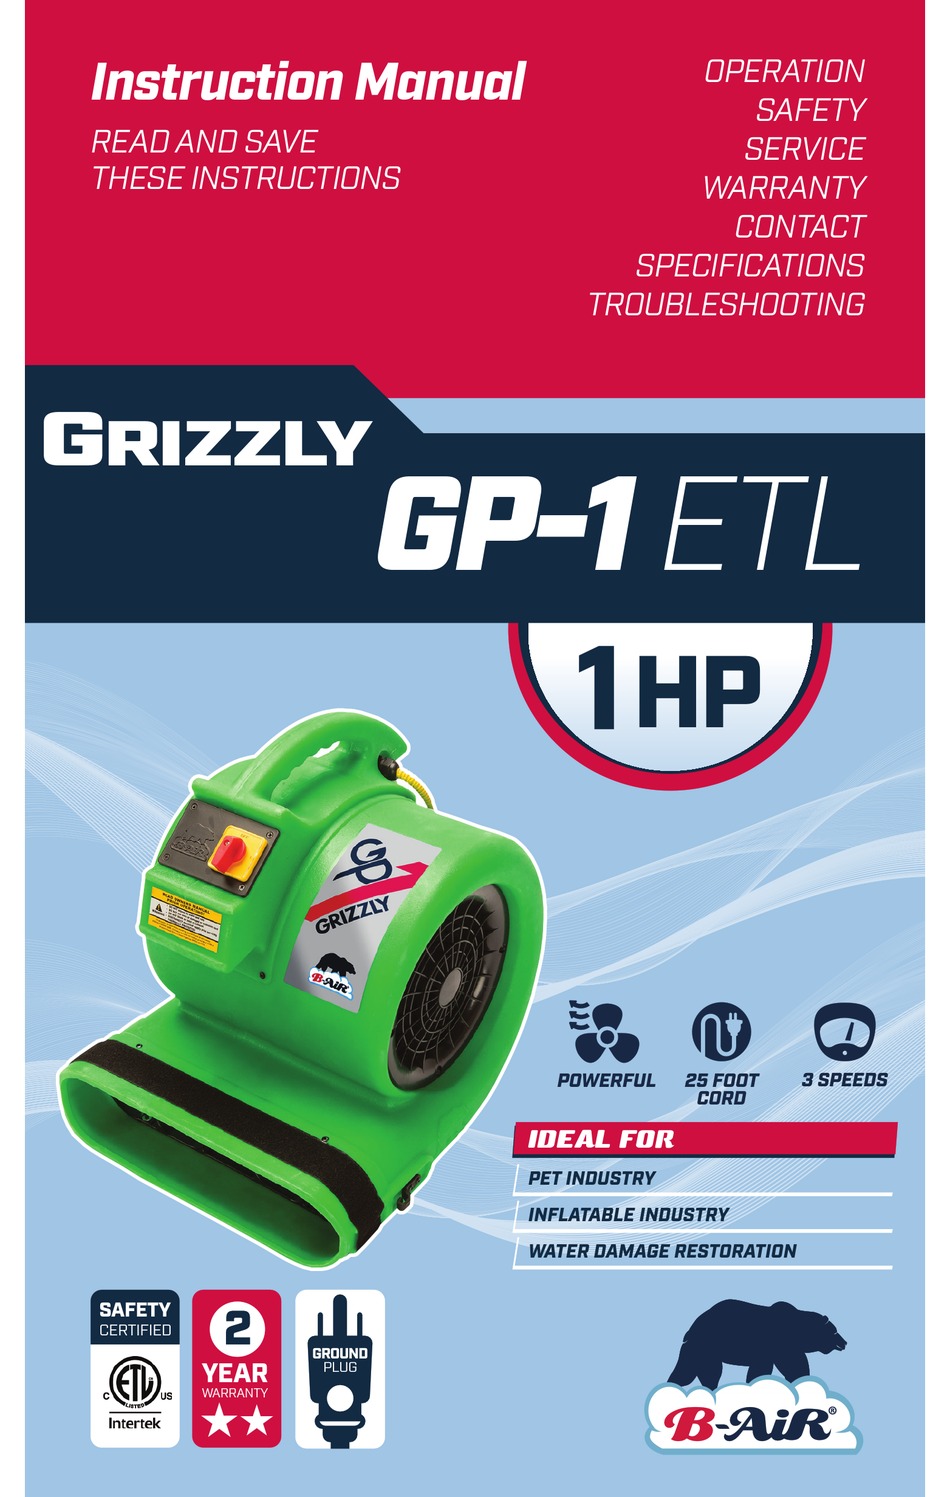 Grizzly GP-1 Blower by B-Air